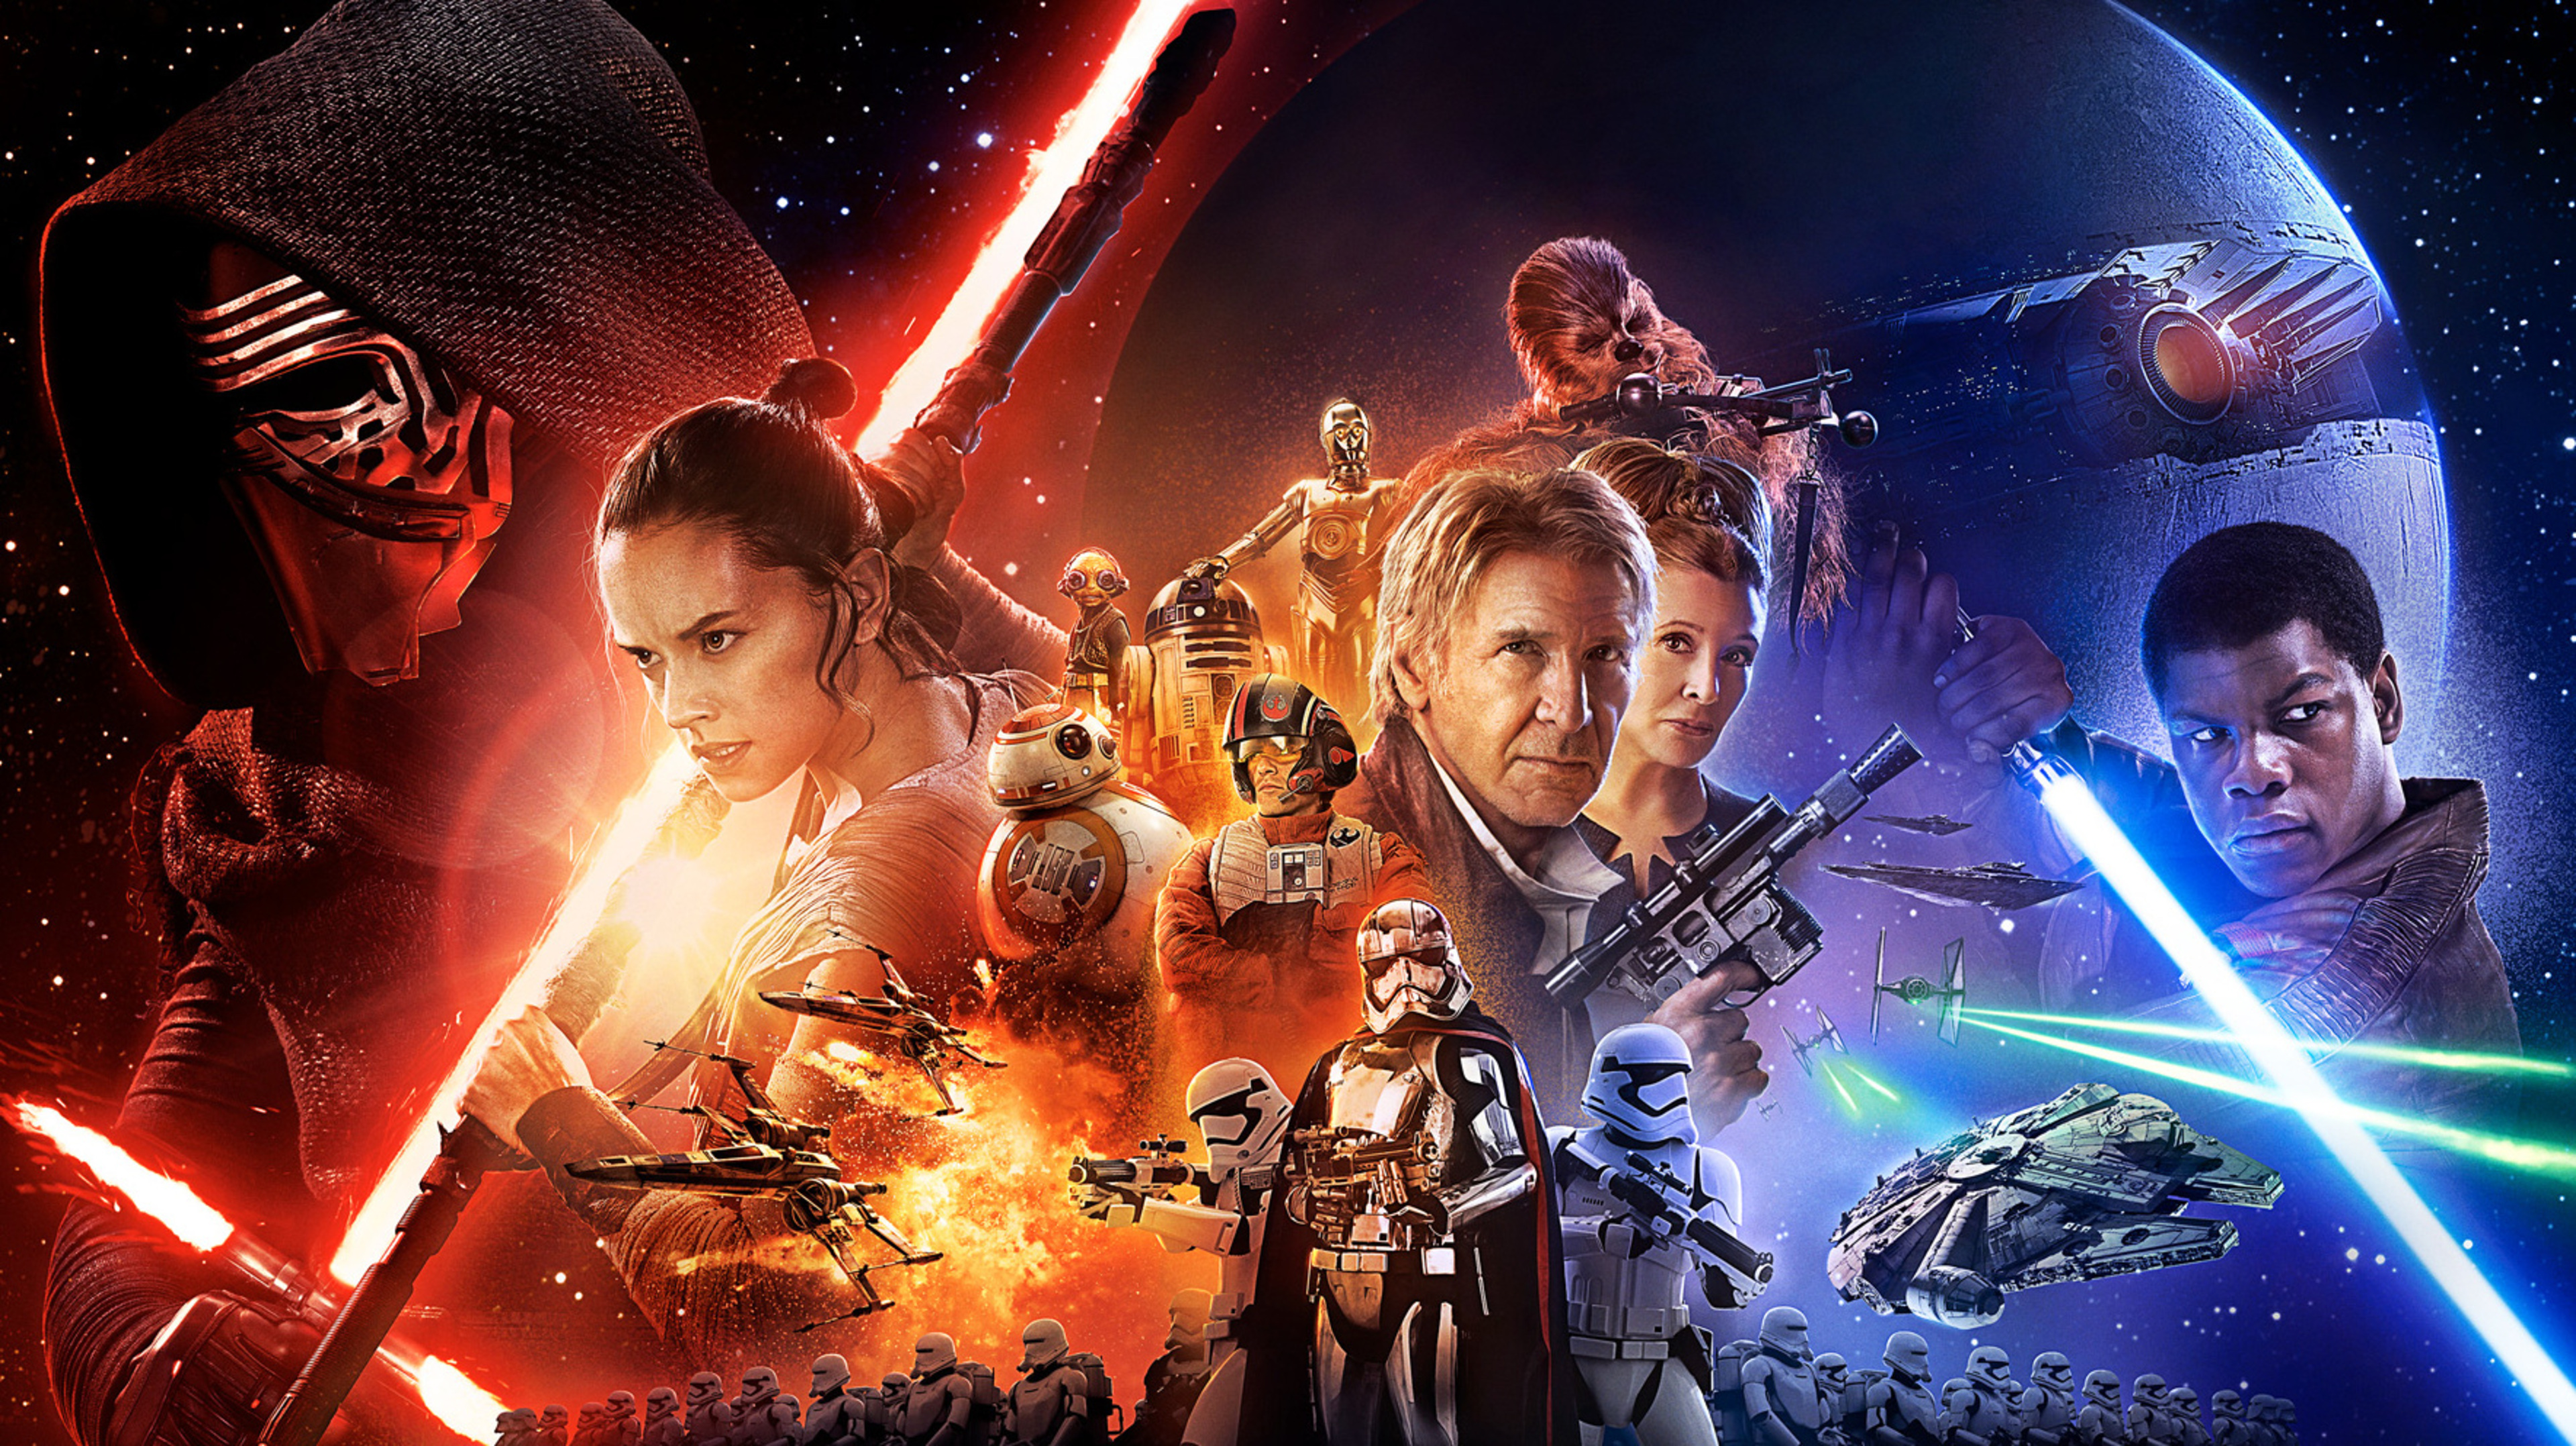 A New Hope for a New Generation: Review of The Force Awakens